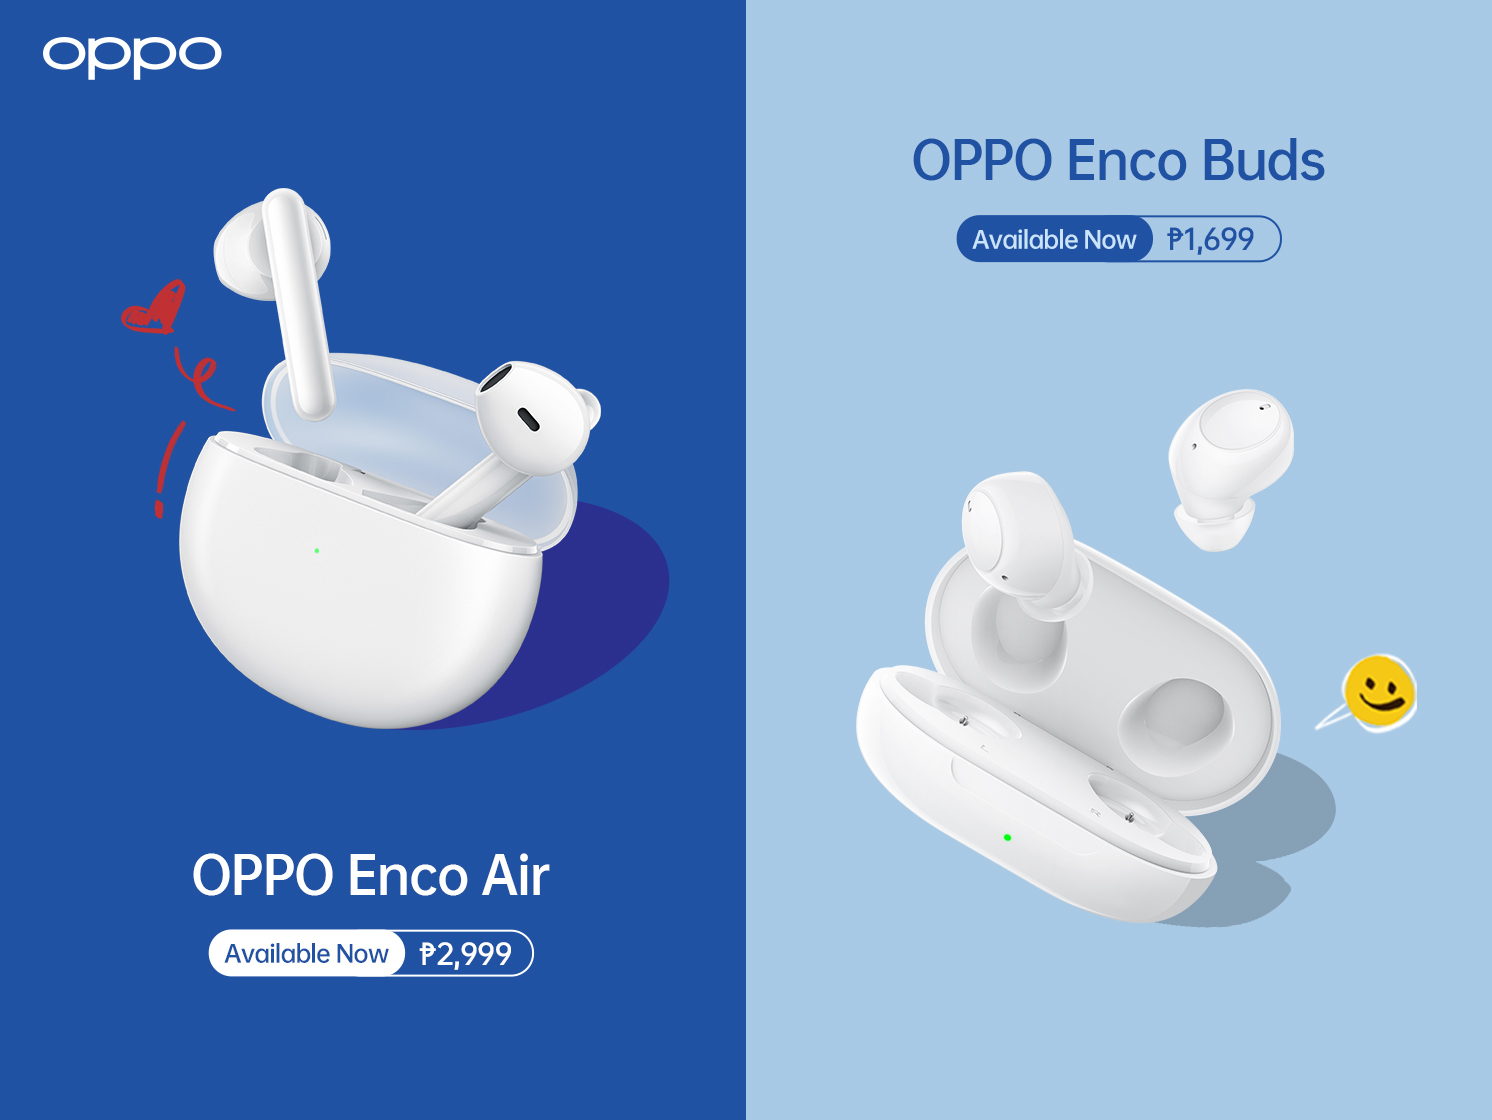 OPPO Enco Buds and OPPO Enco Air now available in the Philippines starting at PHP1,699